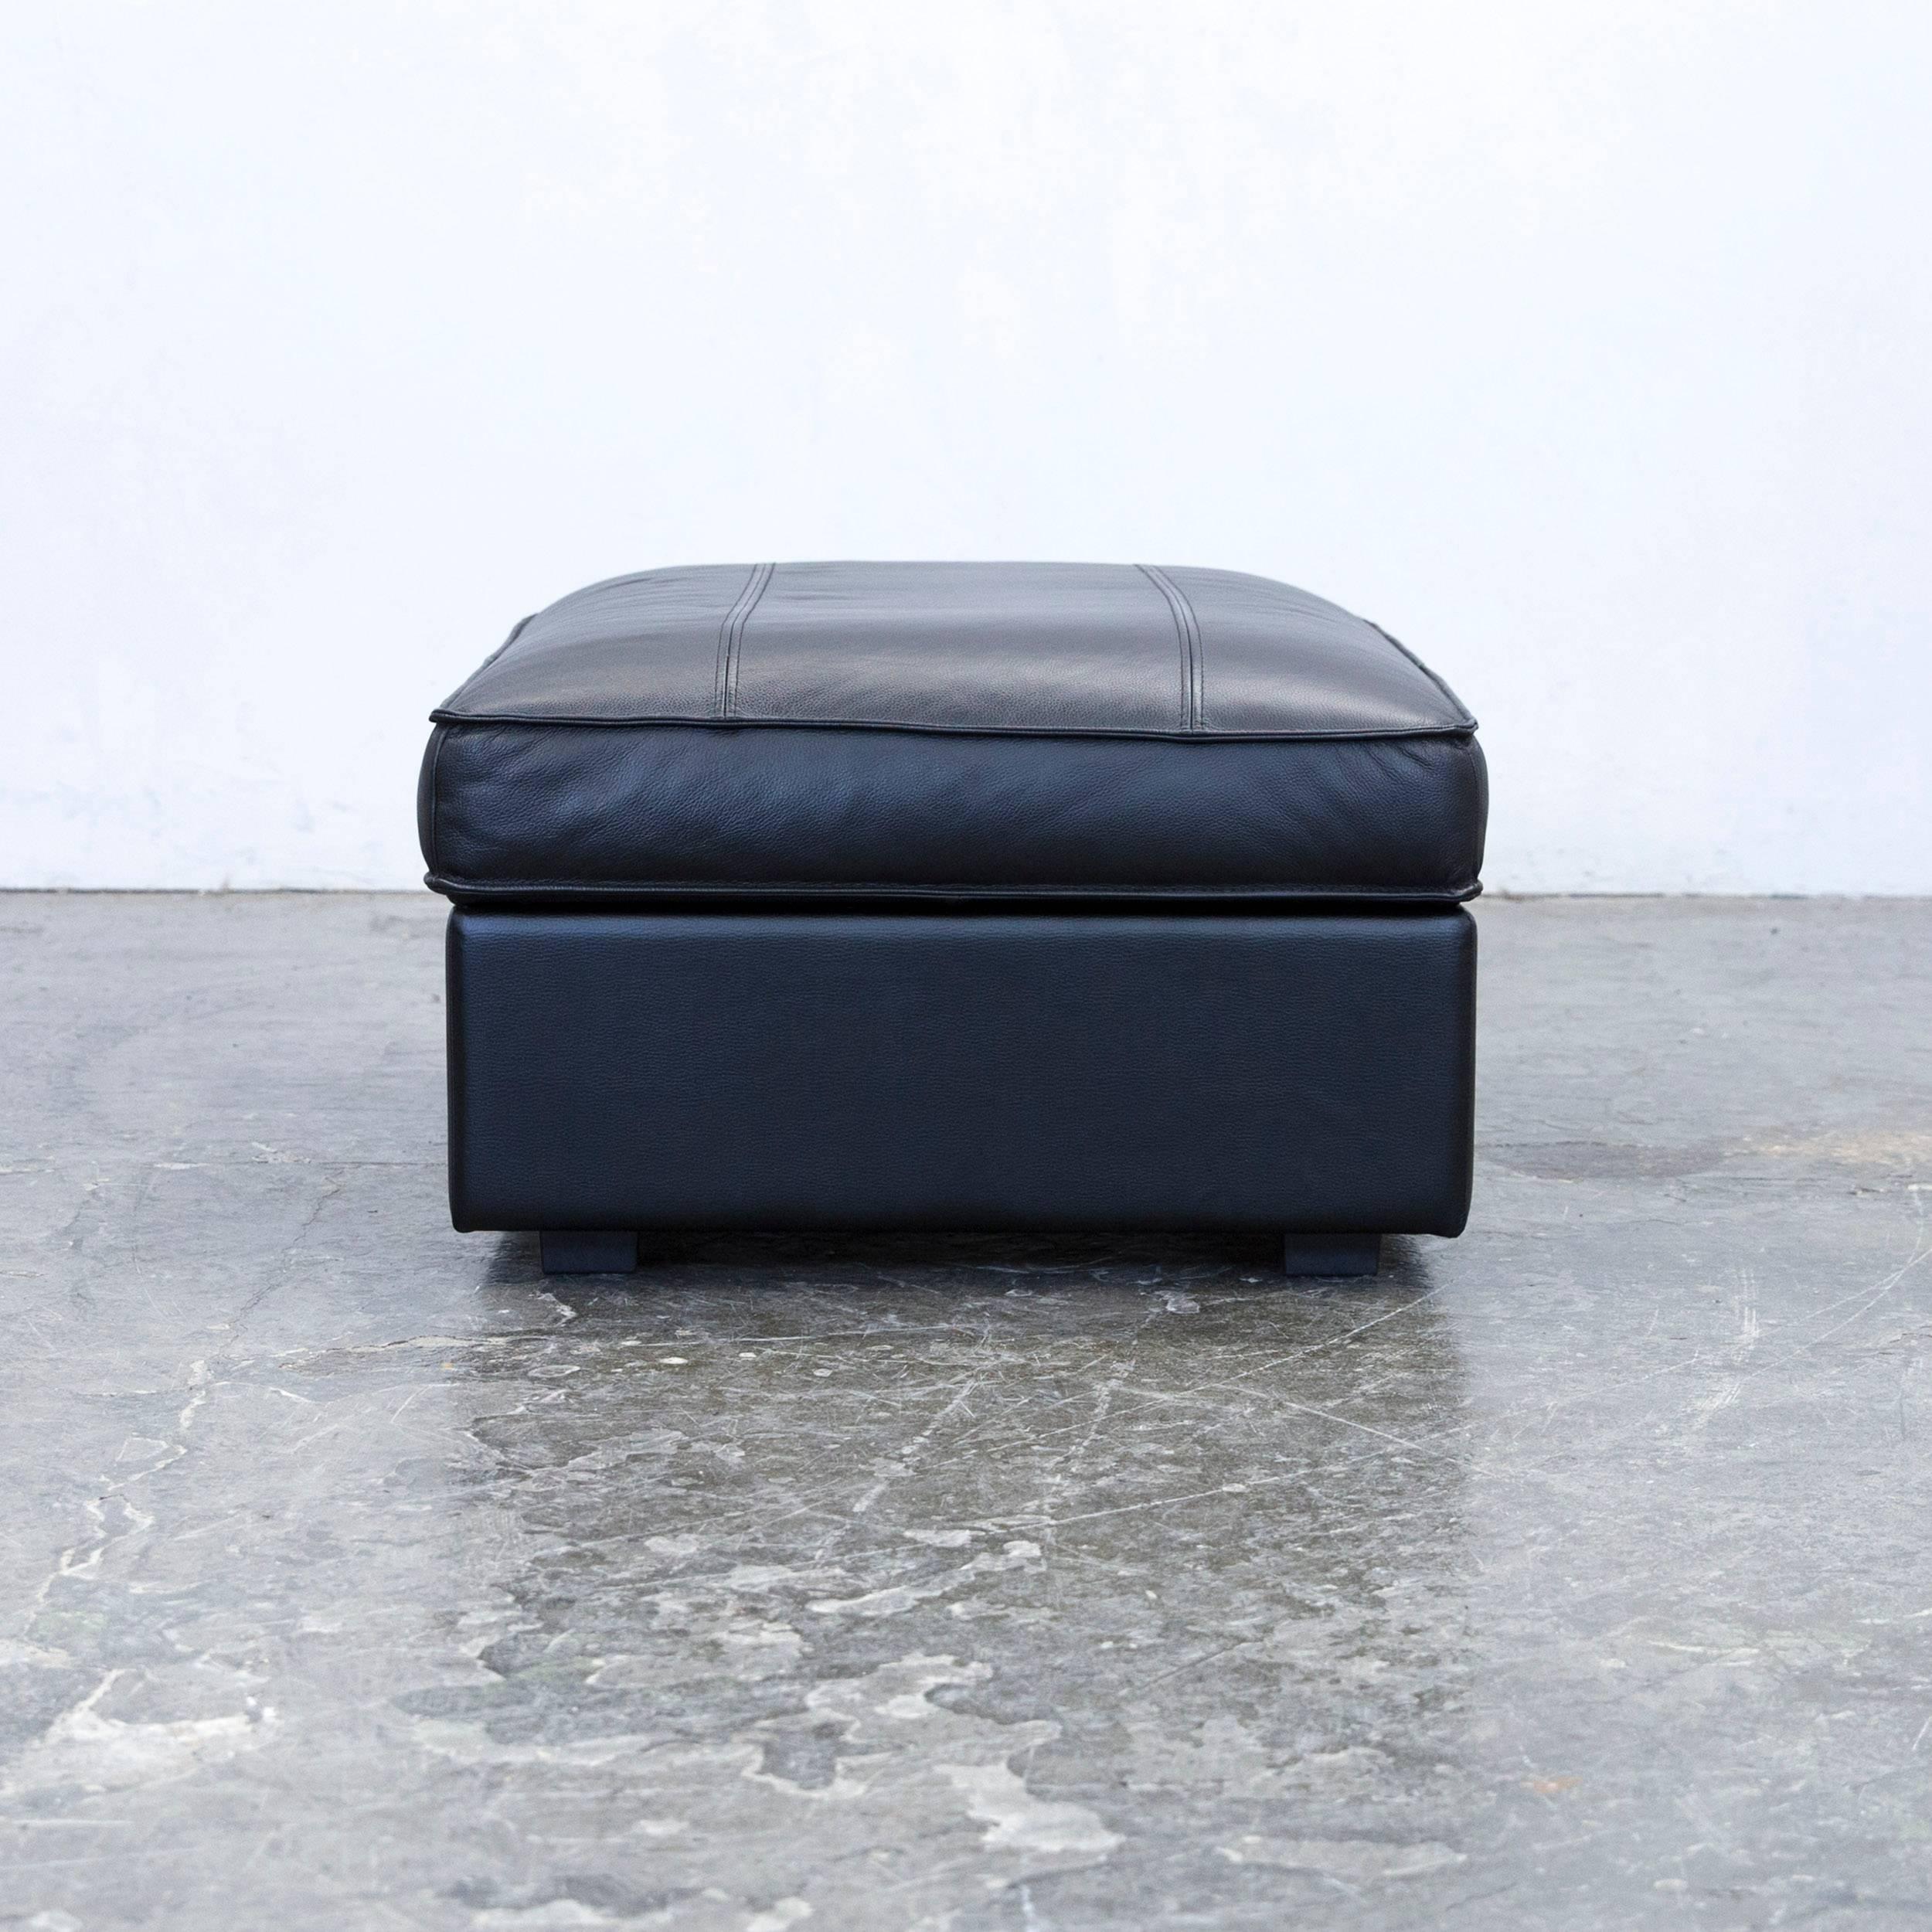 Designer Footstool Leather Black Function Couch Modern Box Storage 3